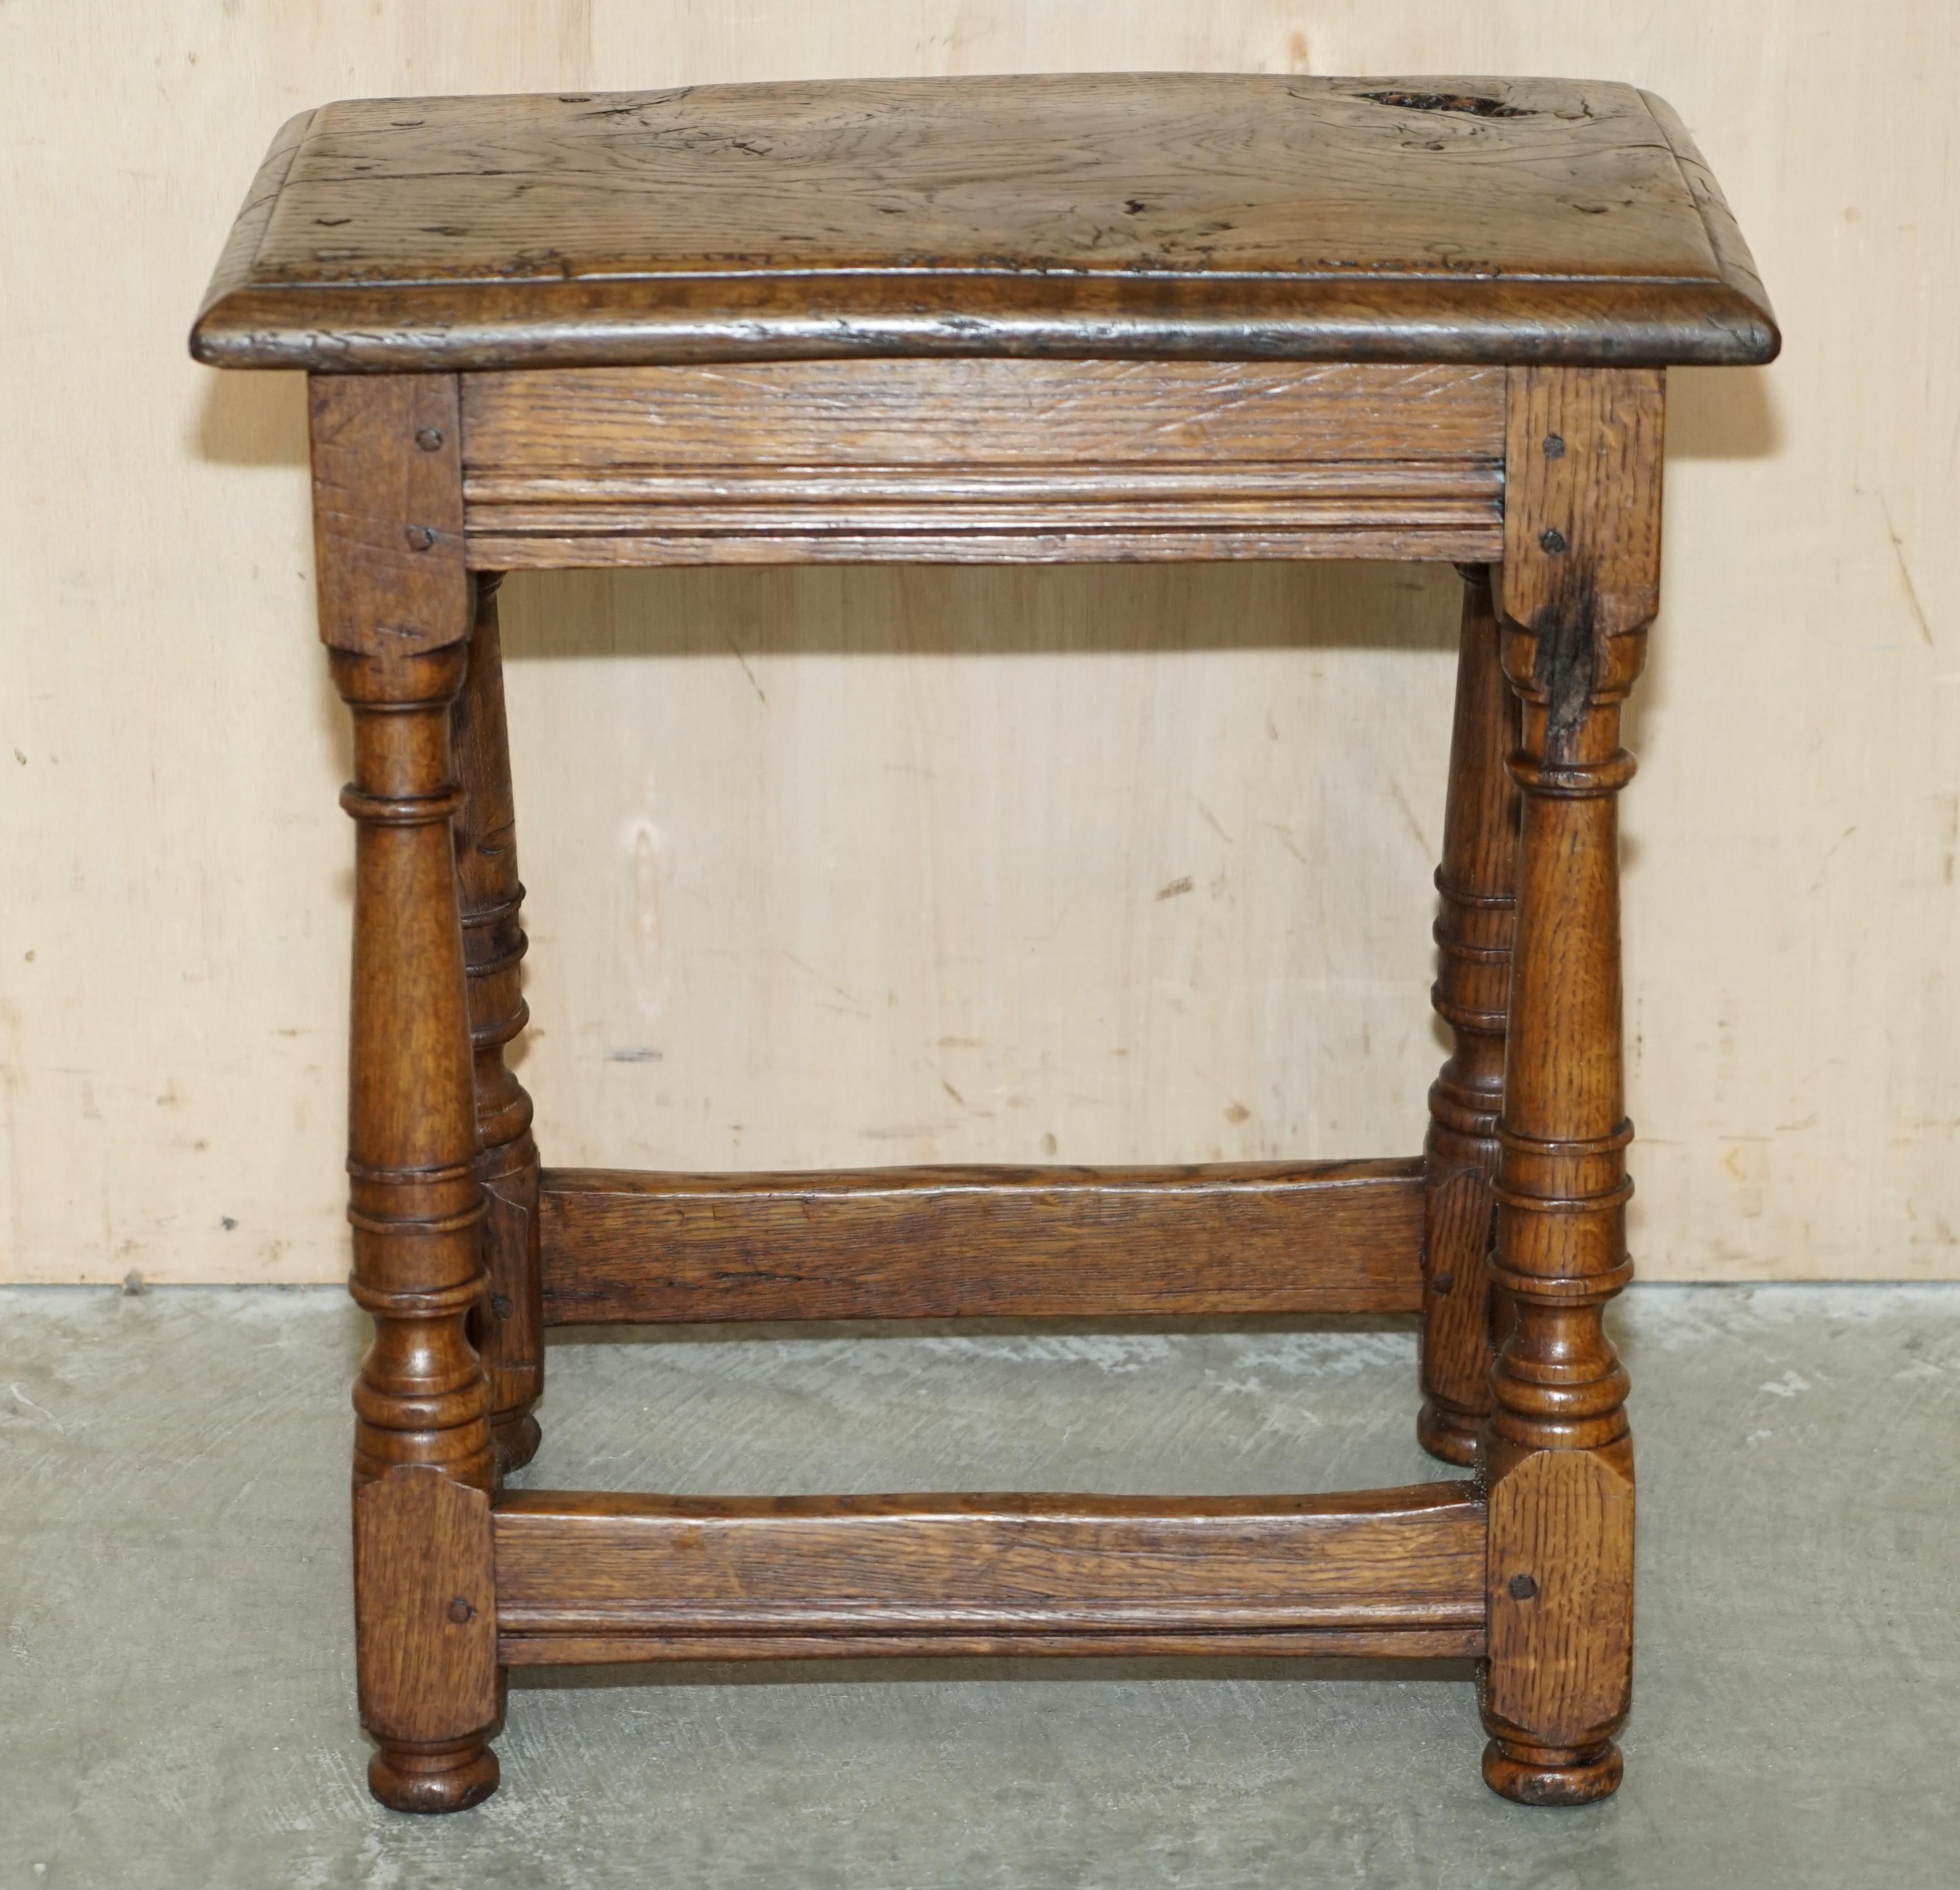 STUNNiNG HEAVILY BURRED OAK ANTIQUE 18TH CENTURY CIRCA 1780 JOINTED STOOL TABLE For Sale 12